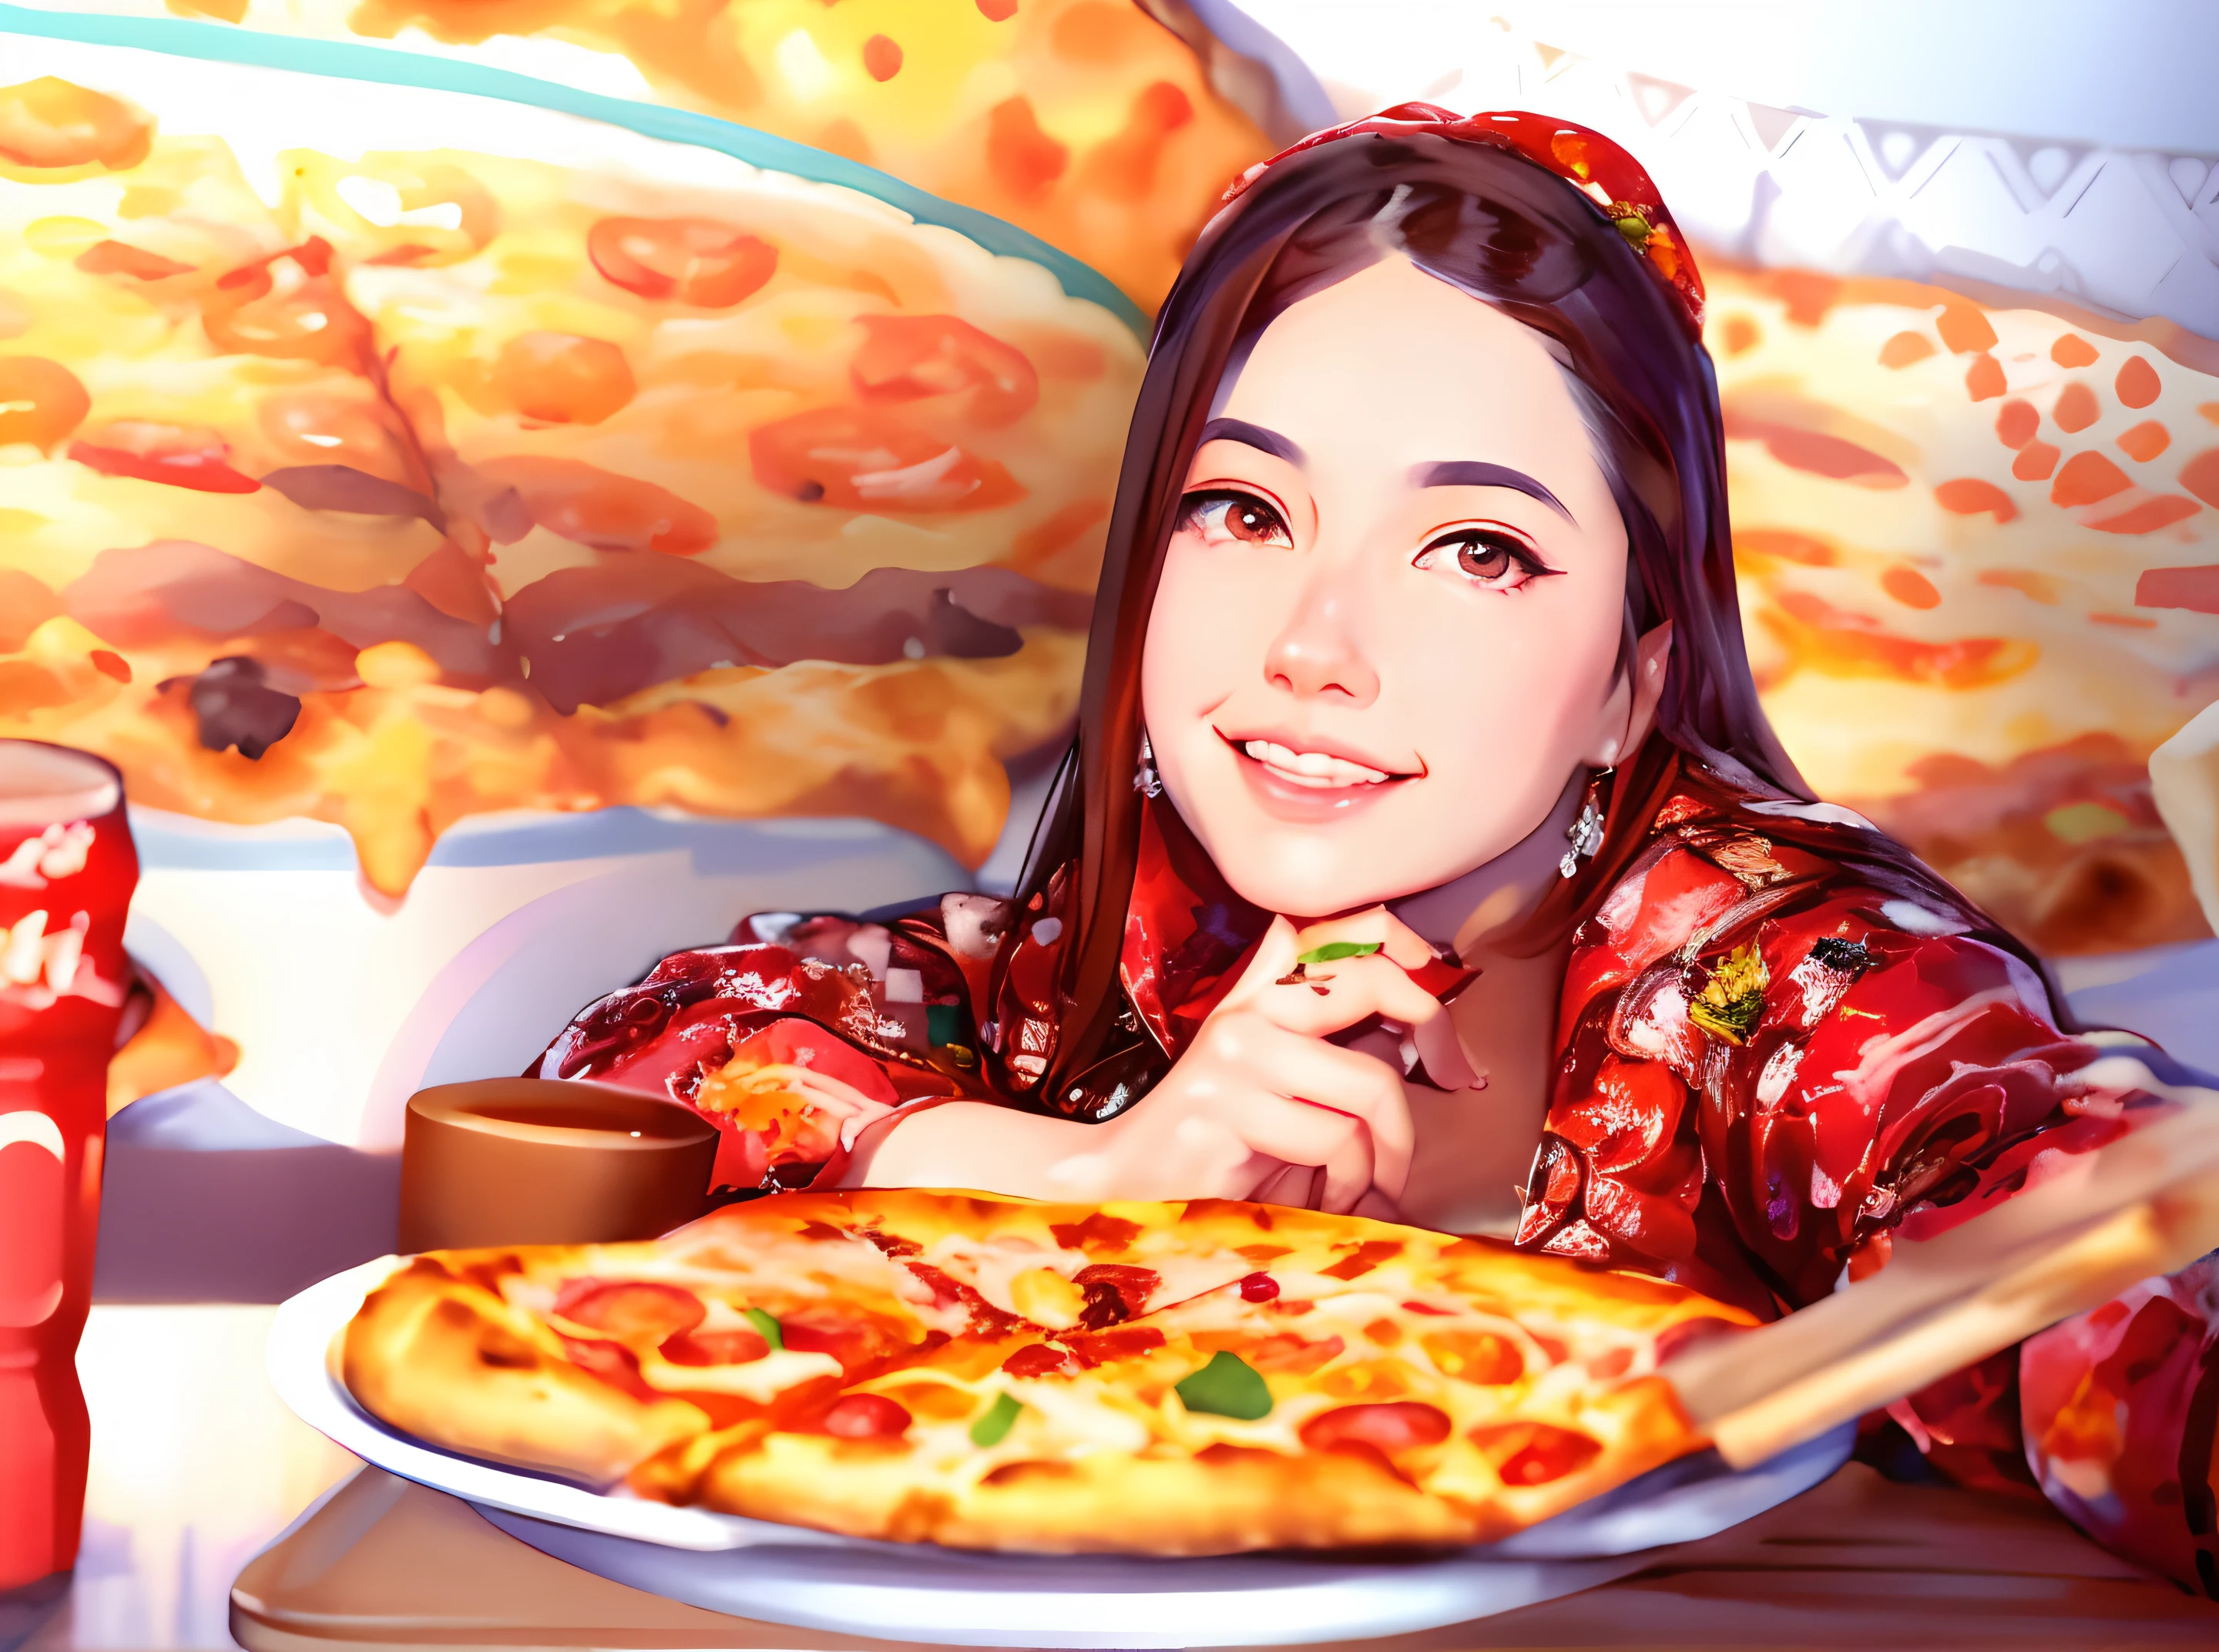 there is a woman sitting at a table with a Pizza, eating Pizza, erstaunliche Essensillustration, eating a Pizza, digitale Malerei im Cartoon-Stil, realistischer Kunststil, holding Pizza, Pizza, digitale Cartoon-Malerei-Kunst, Pizza!, Digitale Anime-Illustration, Alice x. zhang, realism artstyle, artwork in the style of guweiz, stilisierte digitale Illustration, exquisite digitale Illustration